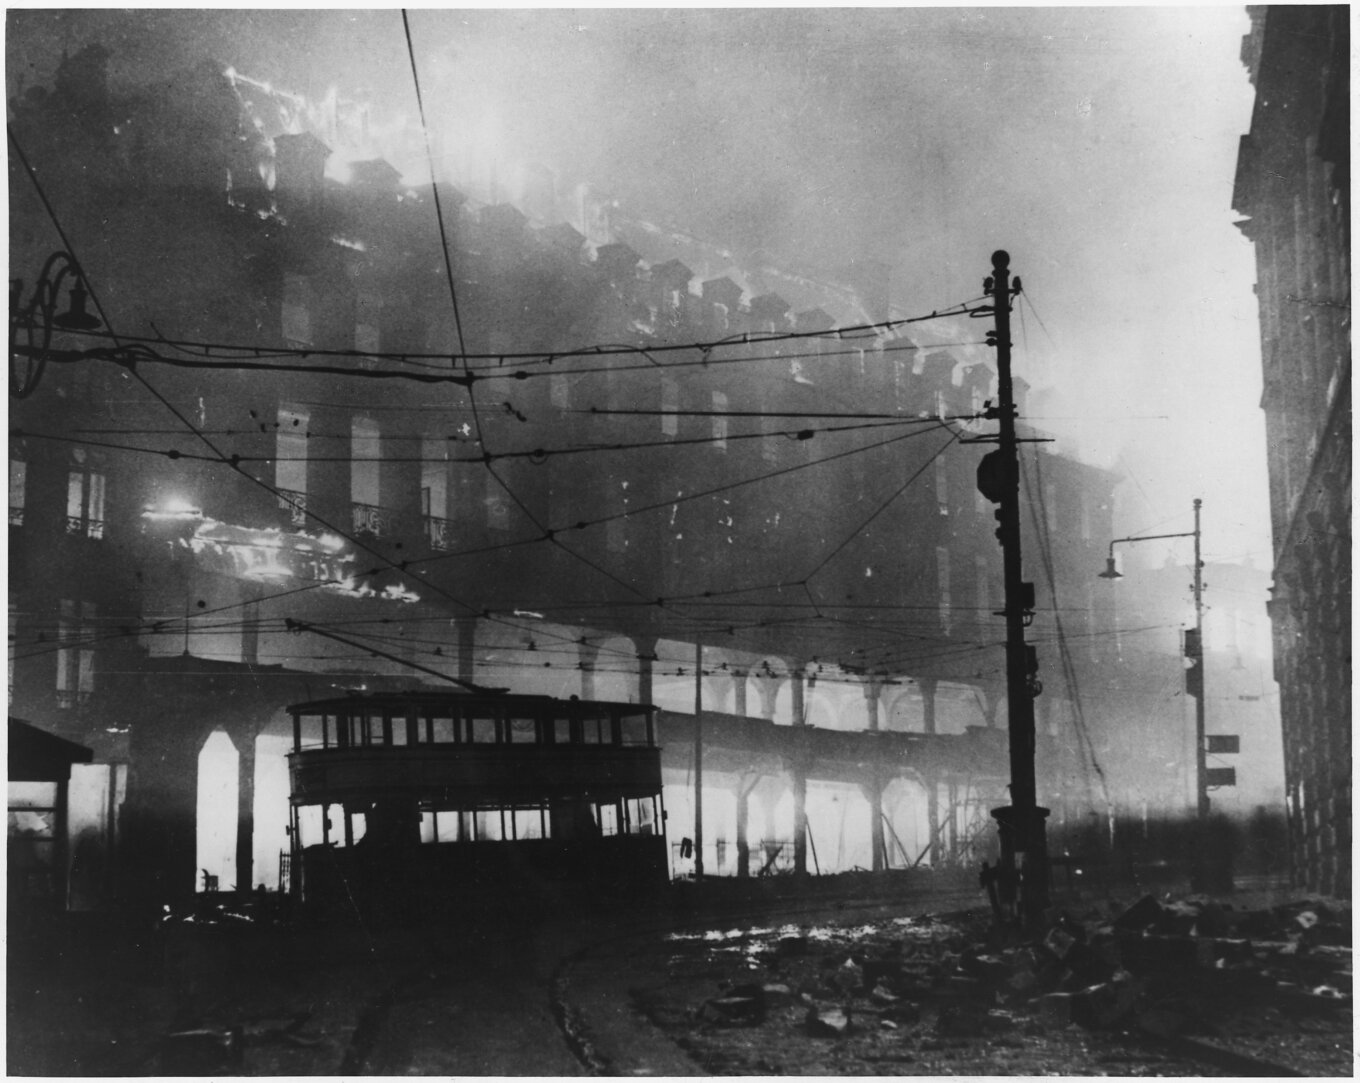 A black and white photo of a burning building.